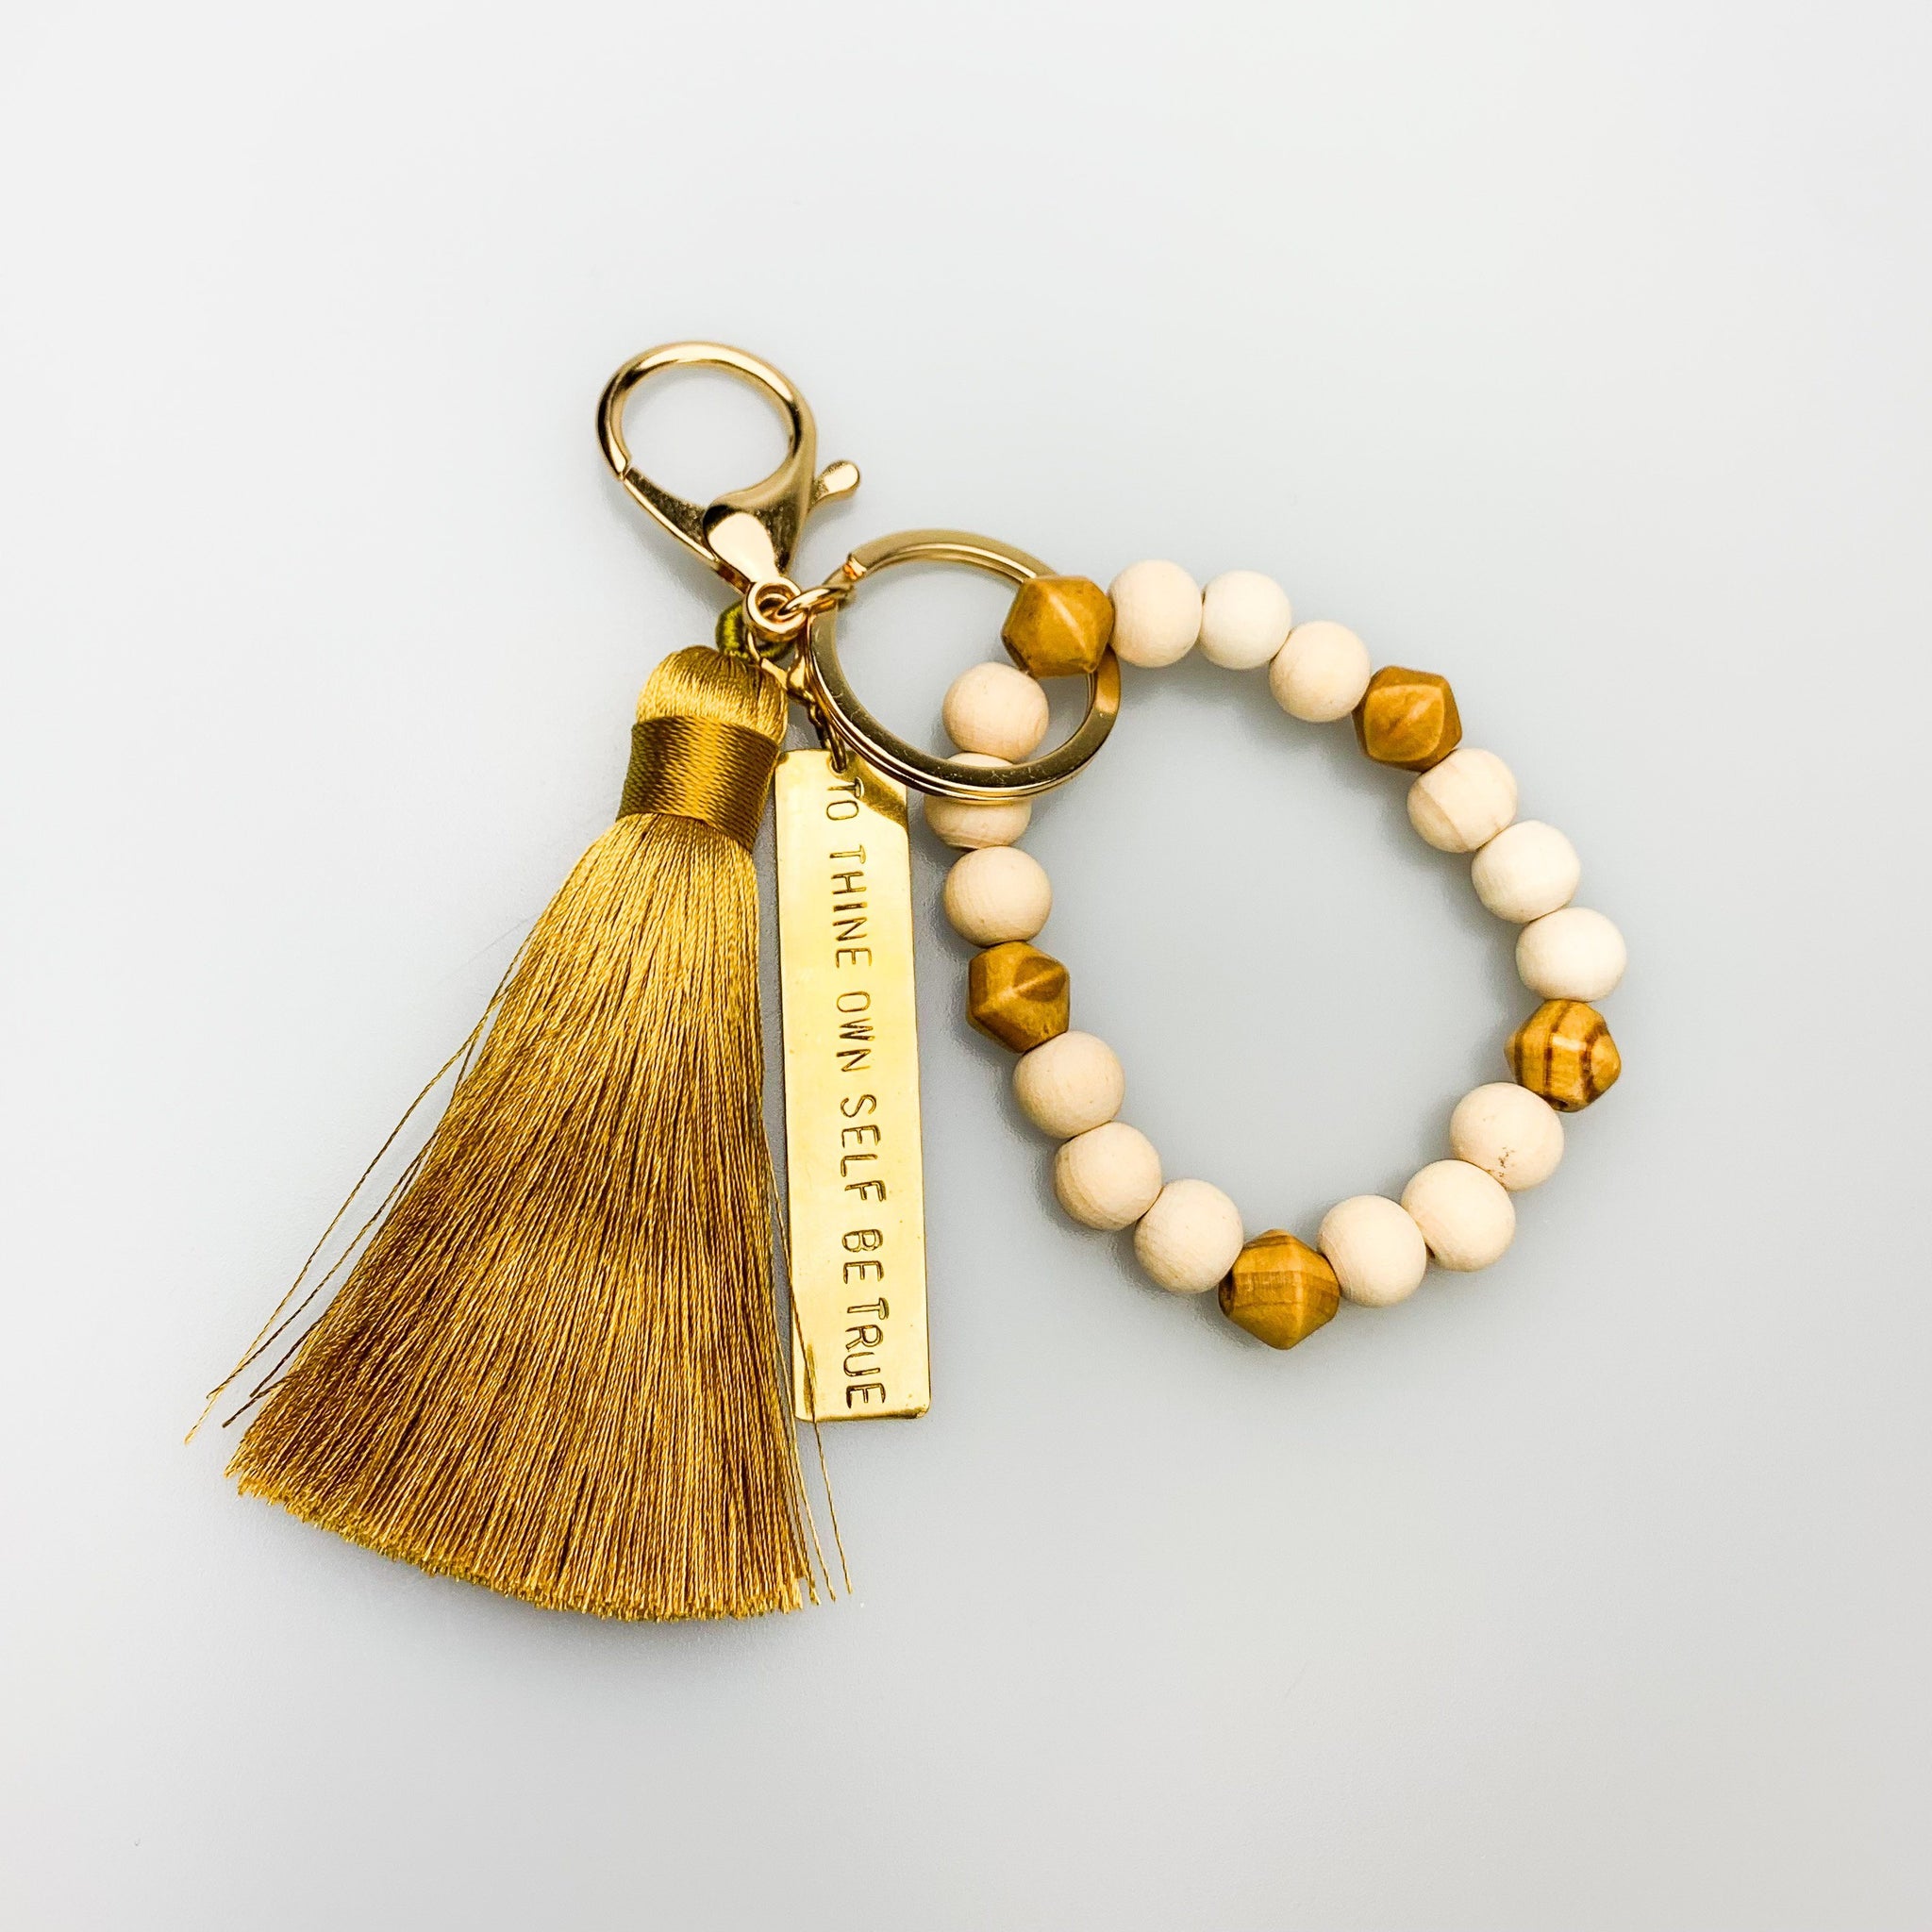 ME™ Affirmation Charms Key Chain Bracelet - To Thine Ownself be True Accessories Show Your Africa 